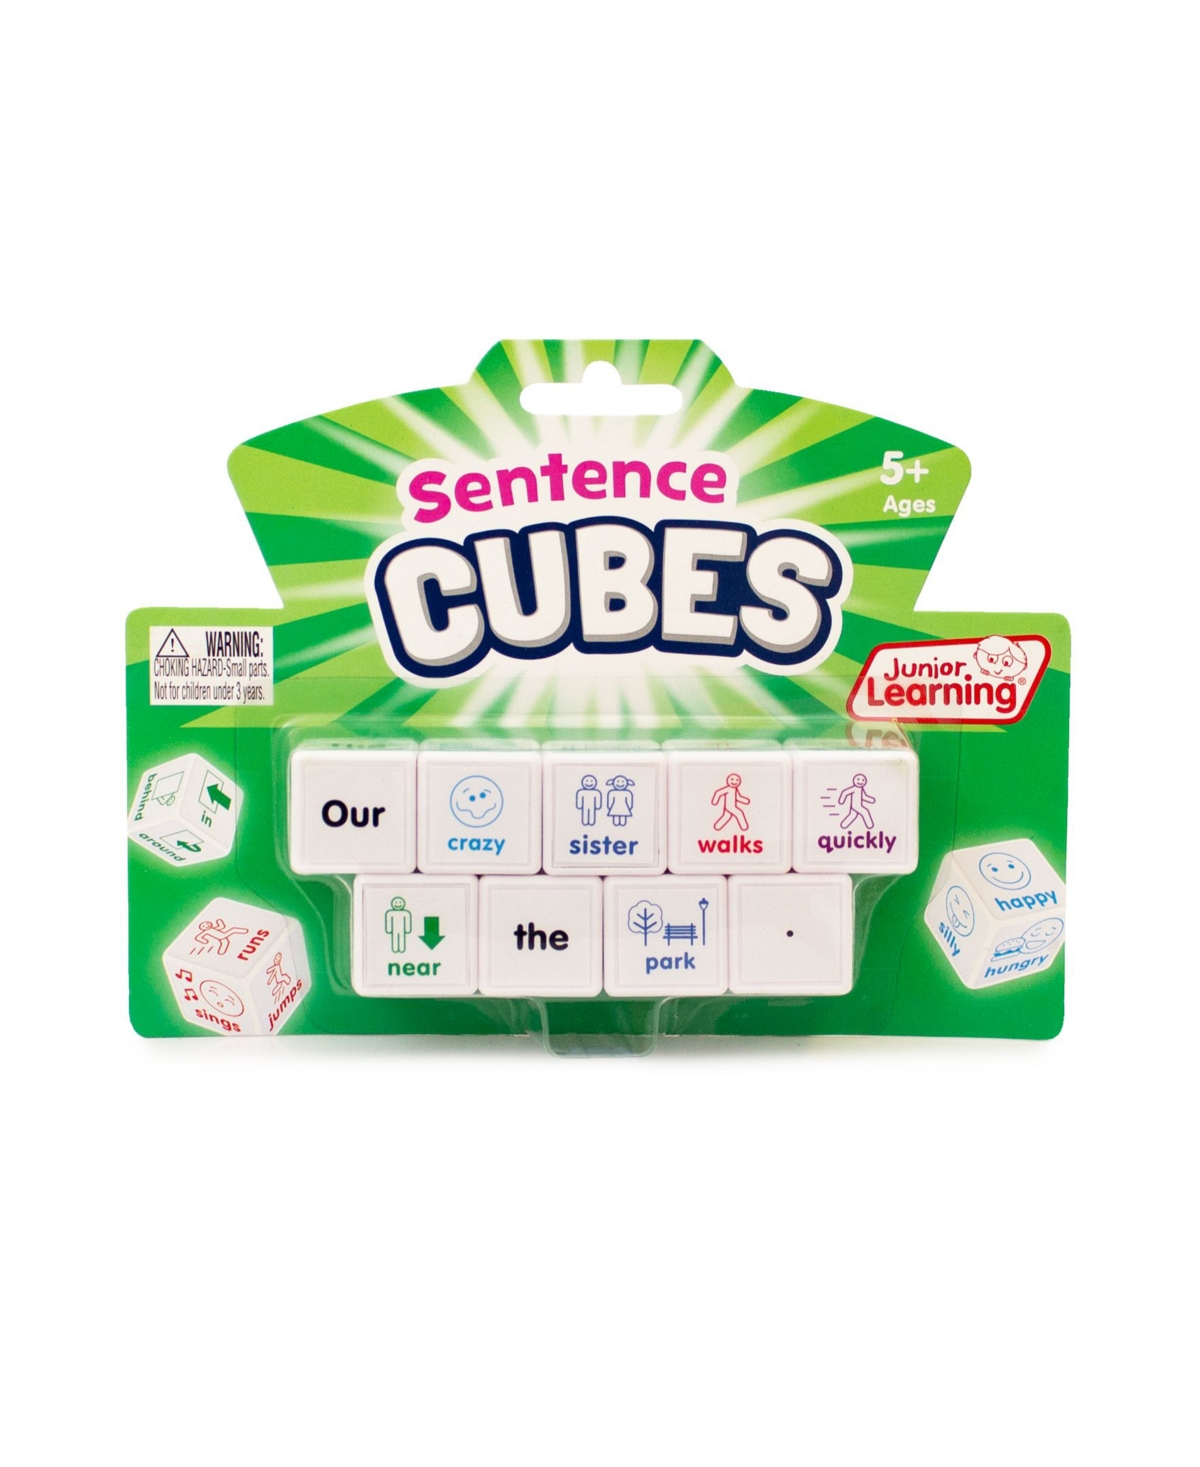 Junior Learning Sentence Cubes Educational Learning Set, 9 Cubes In Multi